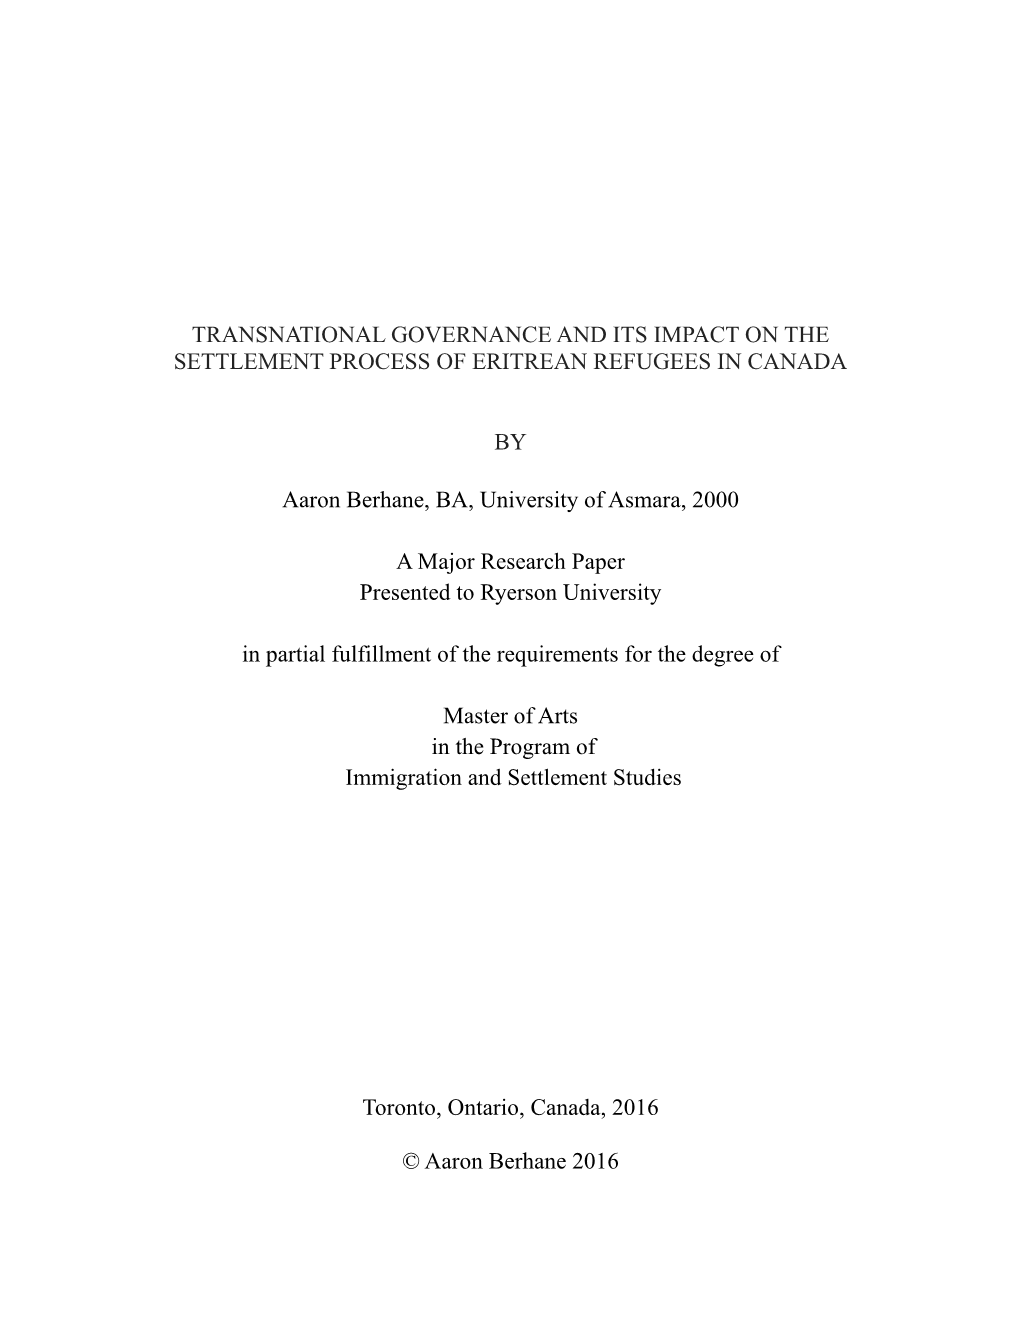 Transnational Governance and Its Impact on the Settlement Process of Eritrean Refugees in Canada